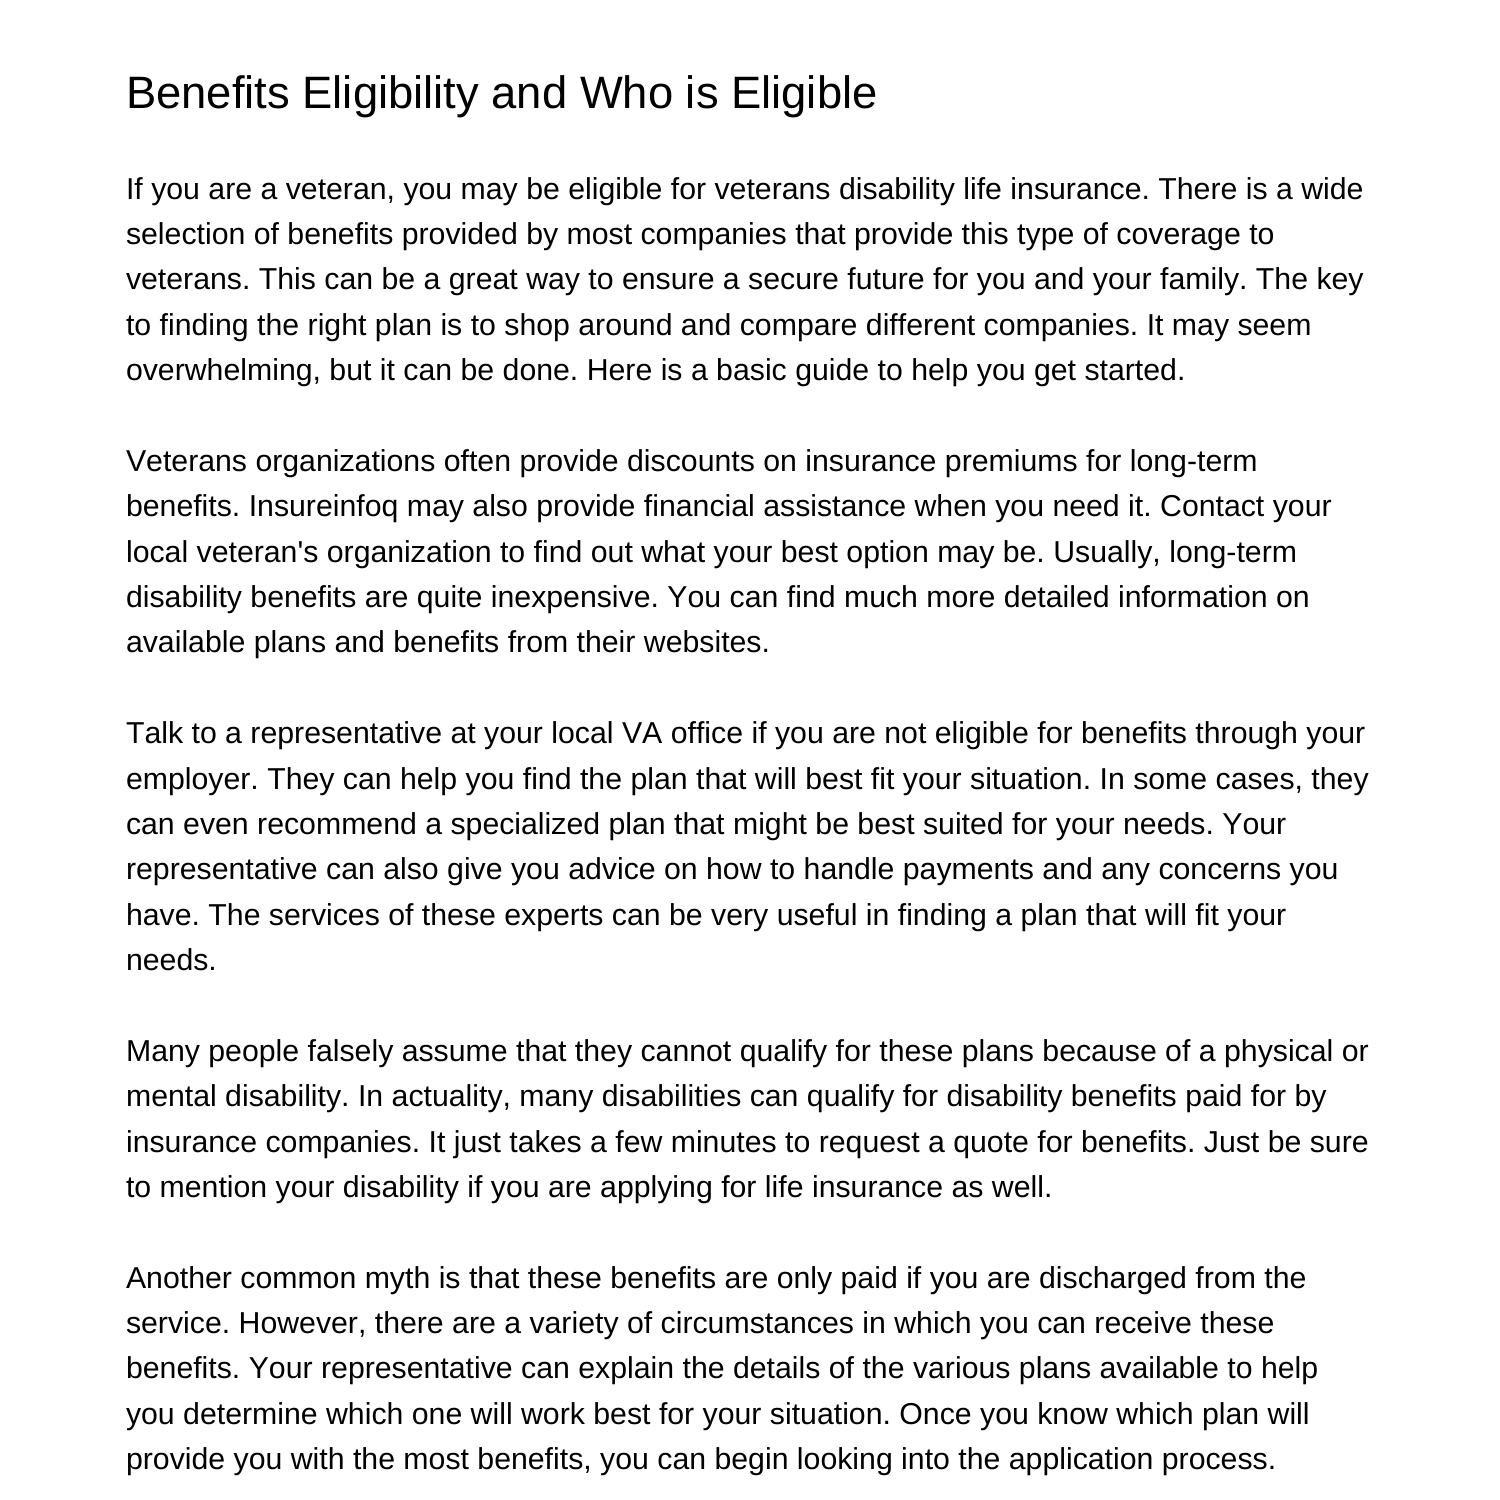 benefits-eligibility-and-who-is-eligibleafnpm-pdf-pdf-docdroid